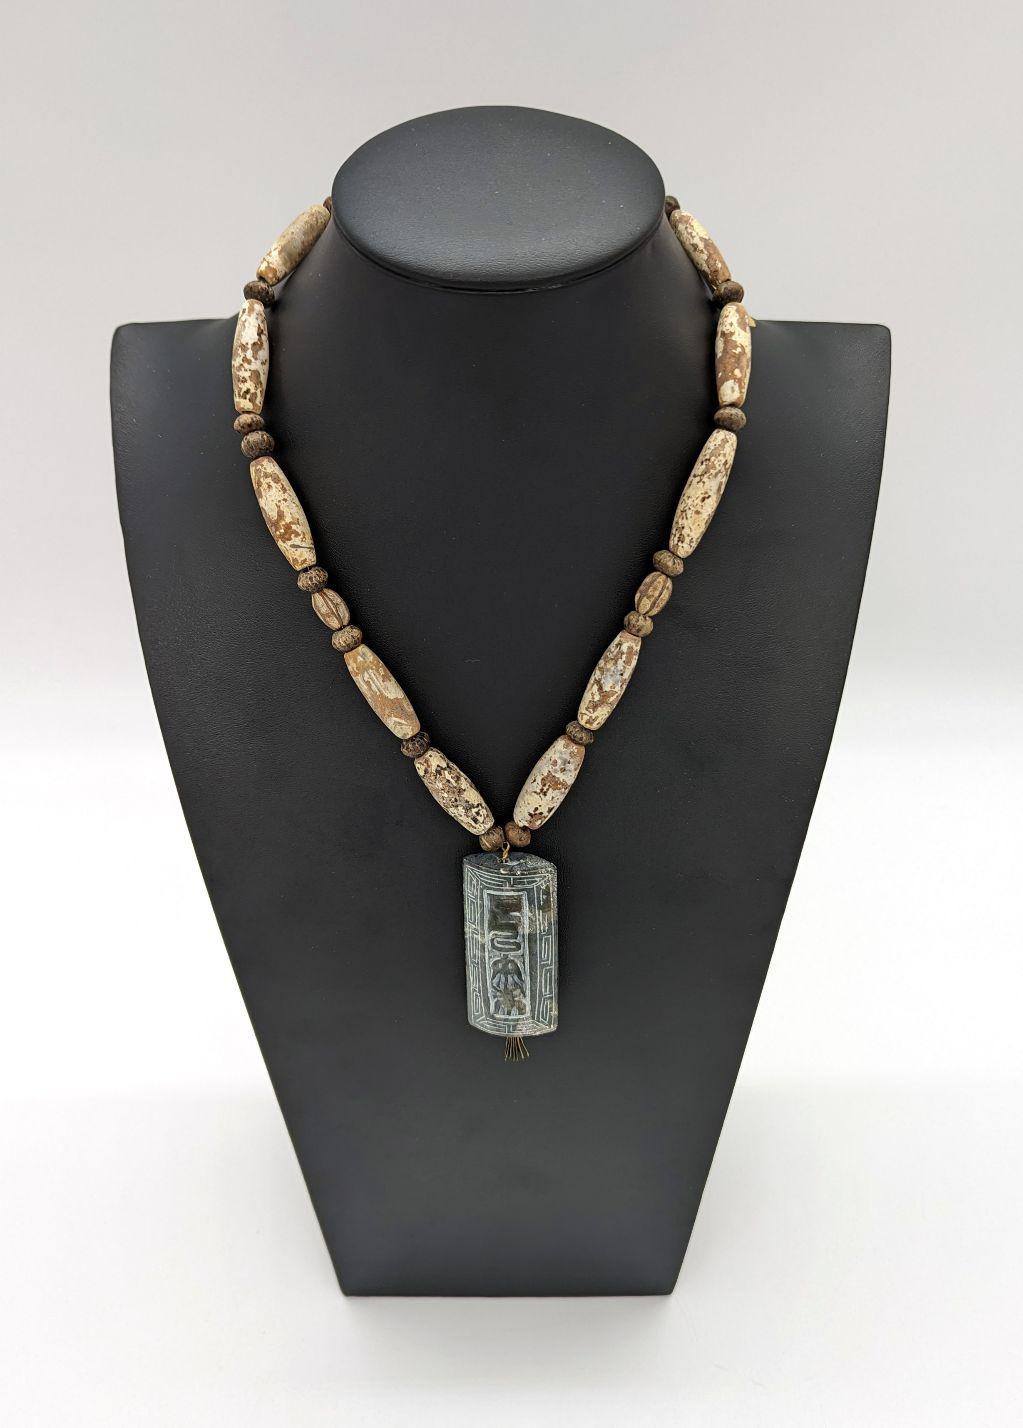 Beaded Necklace by Janalee Robison